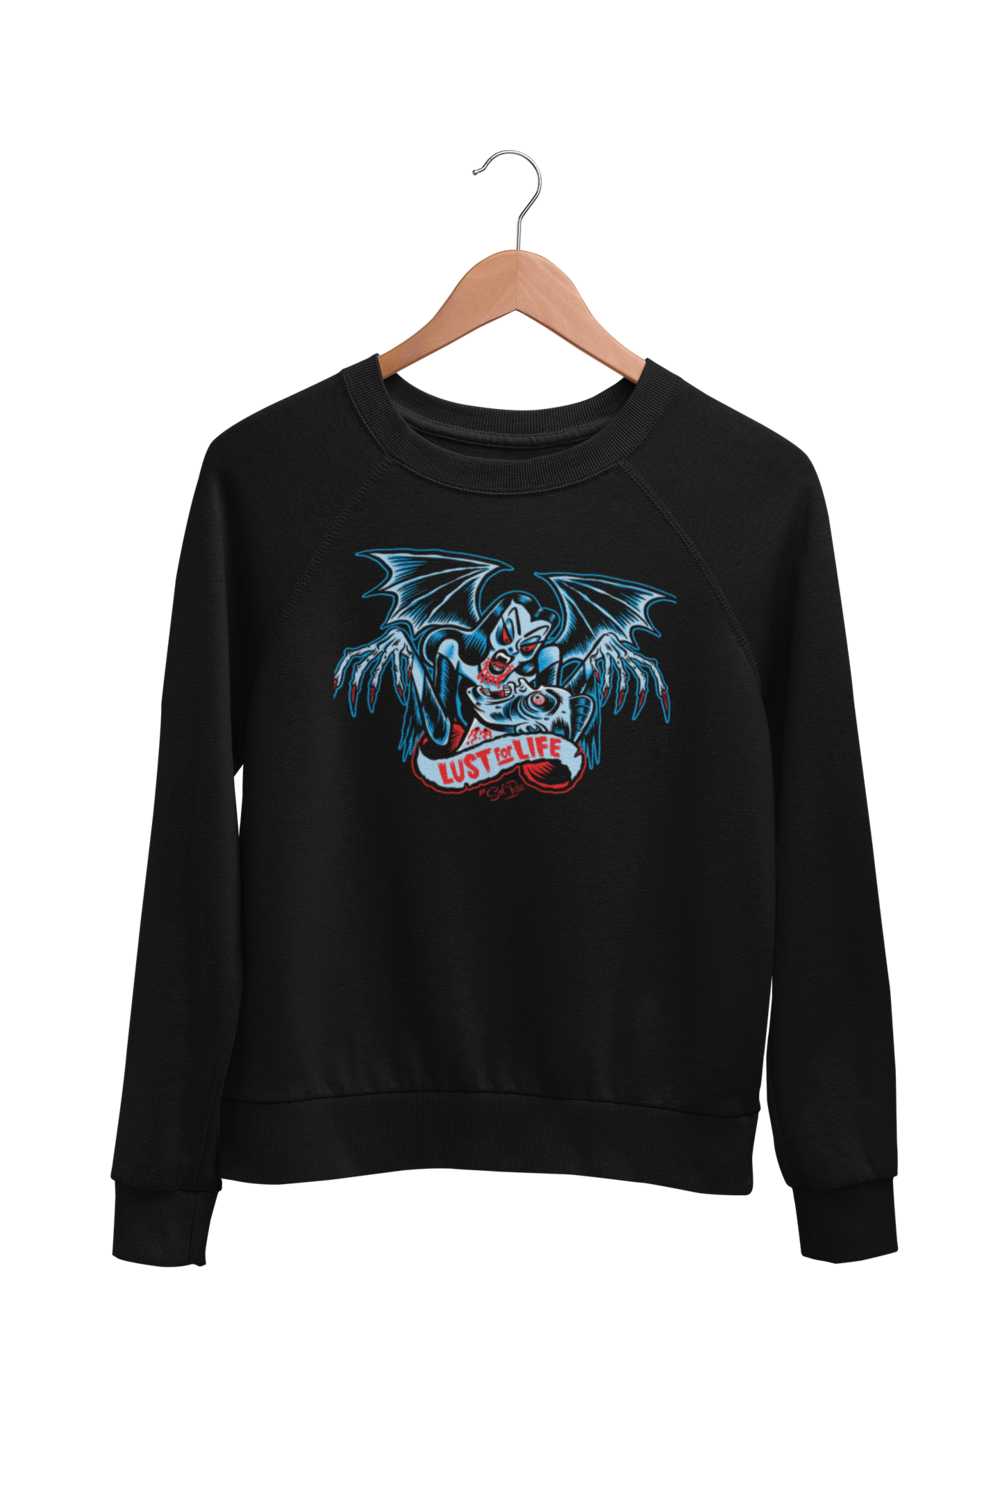 LUST FOR LIFE SWEATSHIRT UNISEX by BY SOL RAC